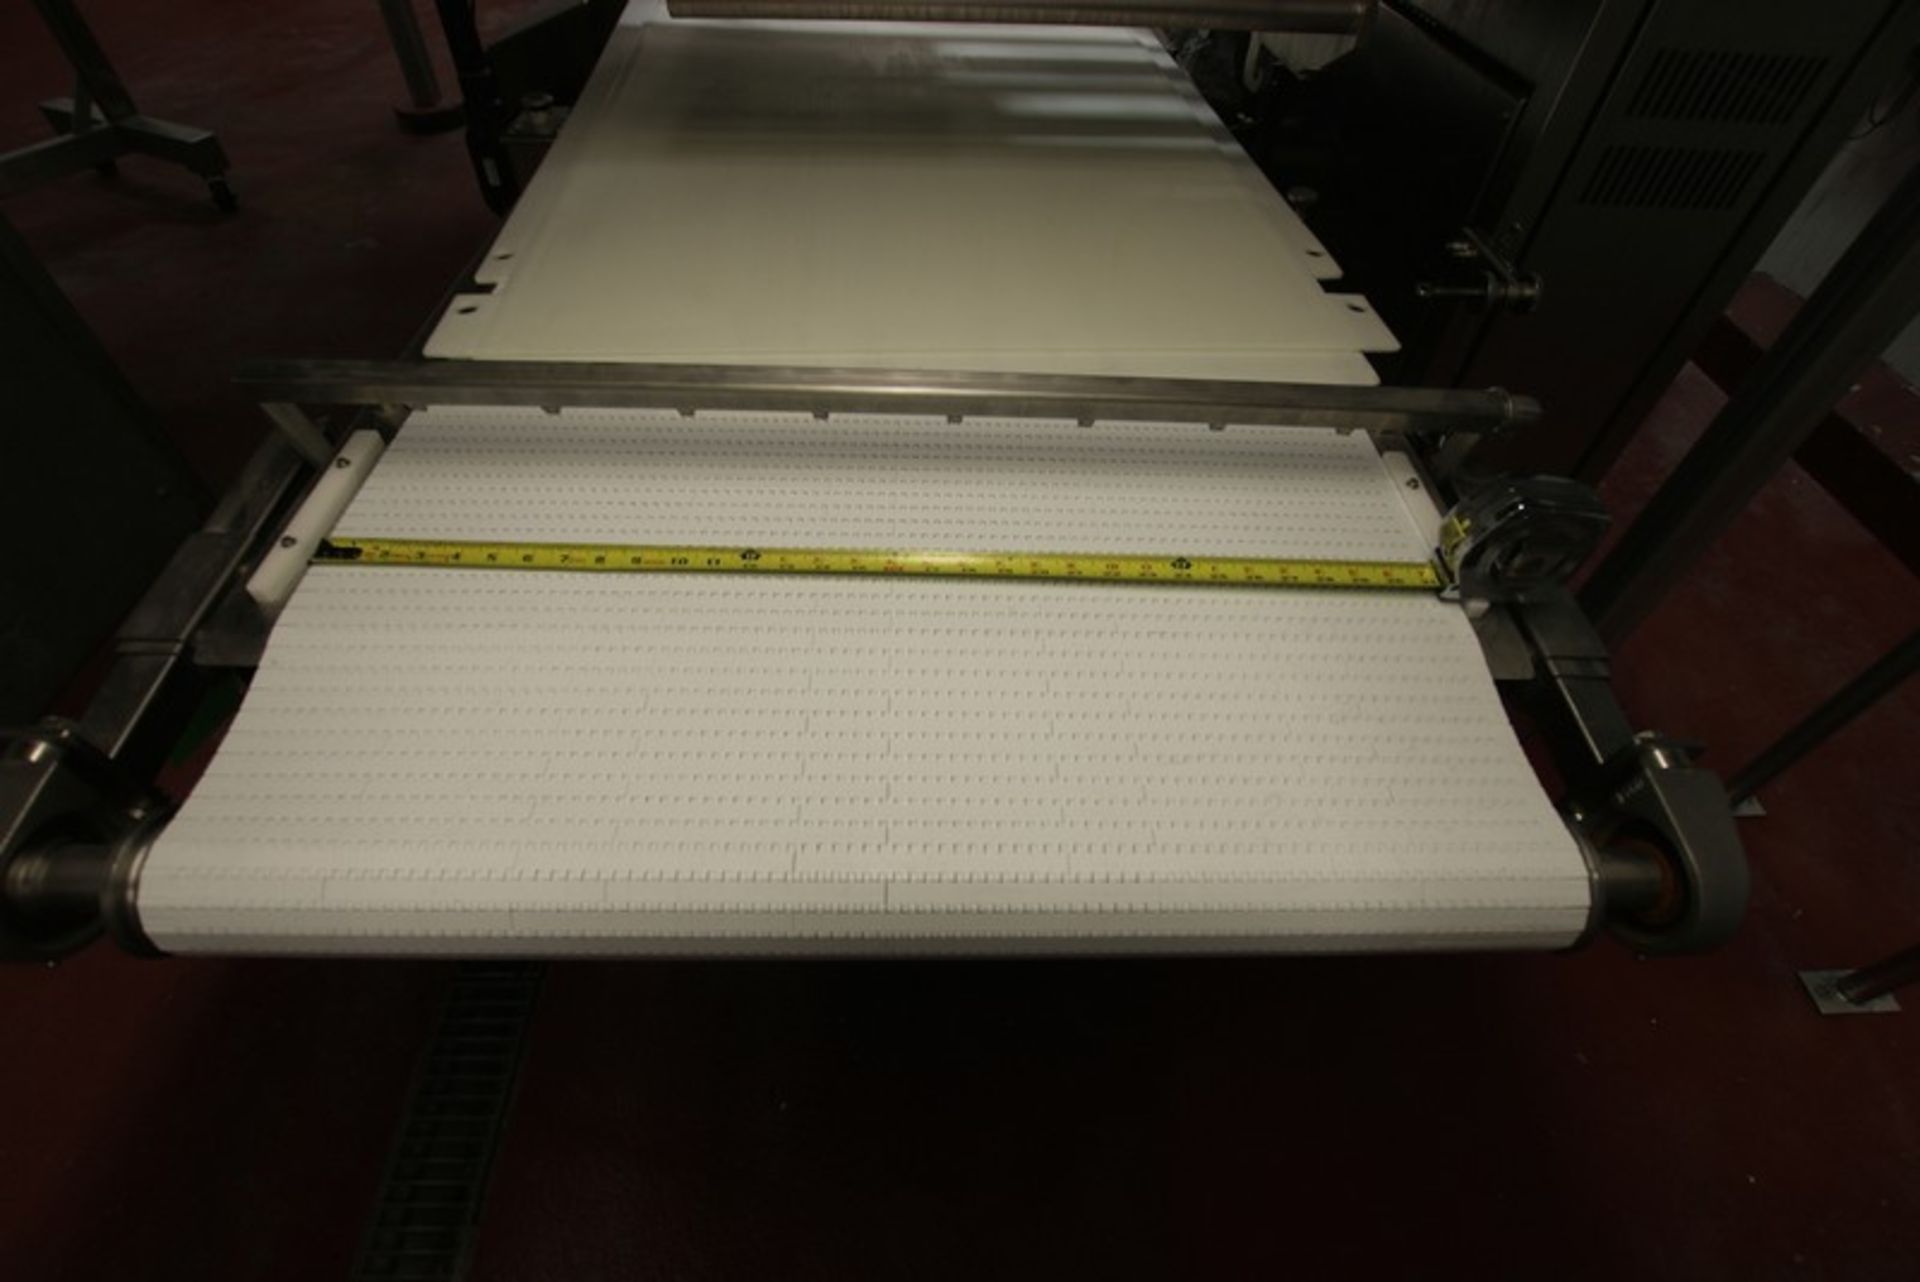 Moline 4 pcs @ 31 ft S/S Dough Sheeter Out-Feed S/S Conveyor System with 32" W Intralux Belting, - Image 14 of 14